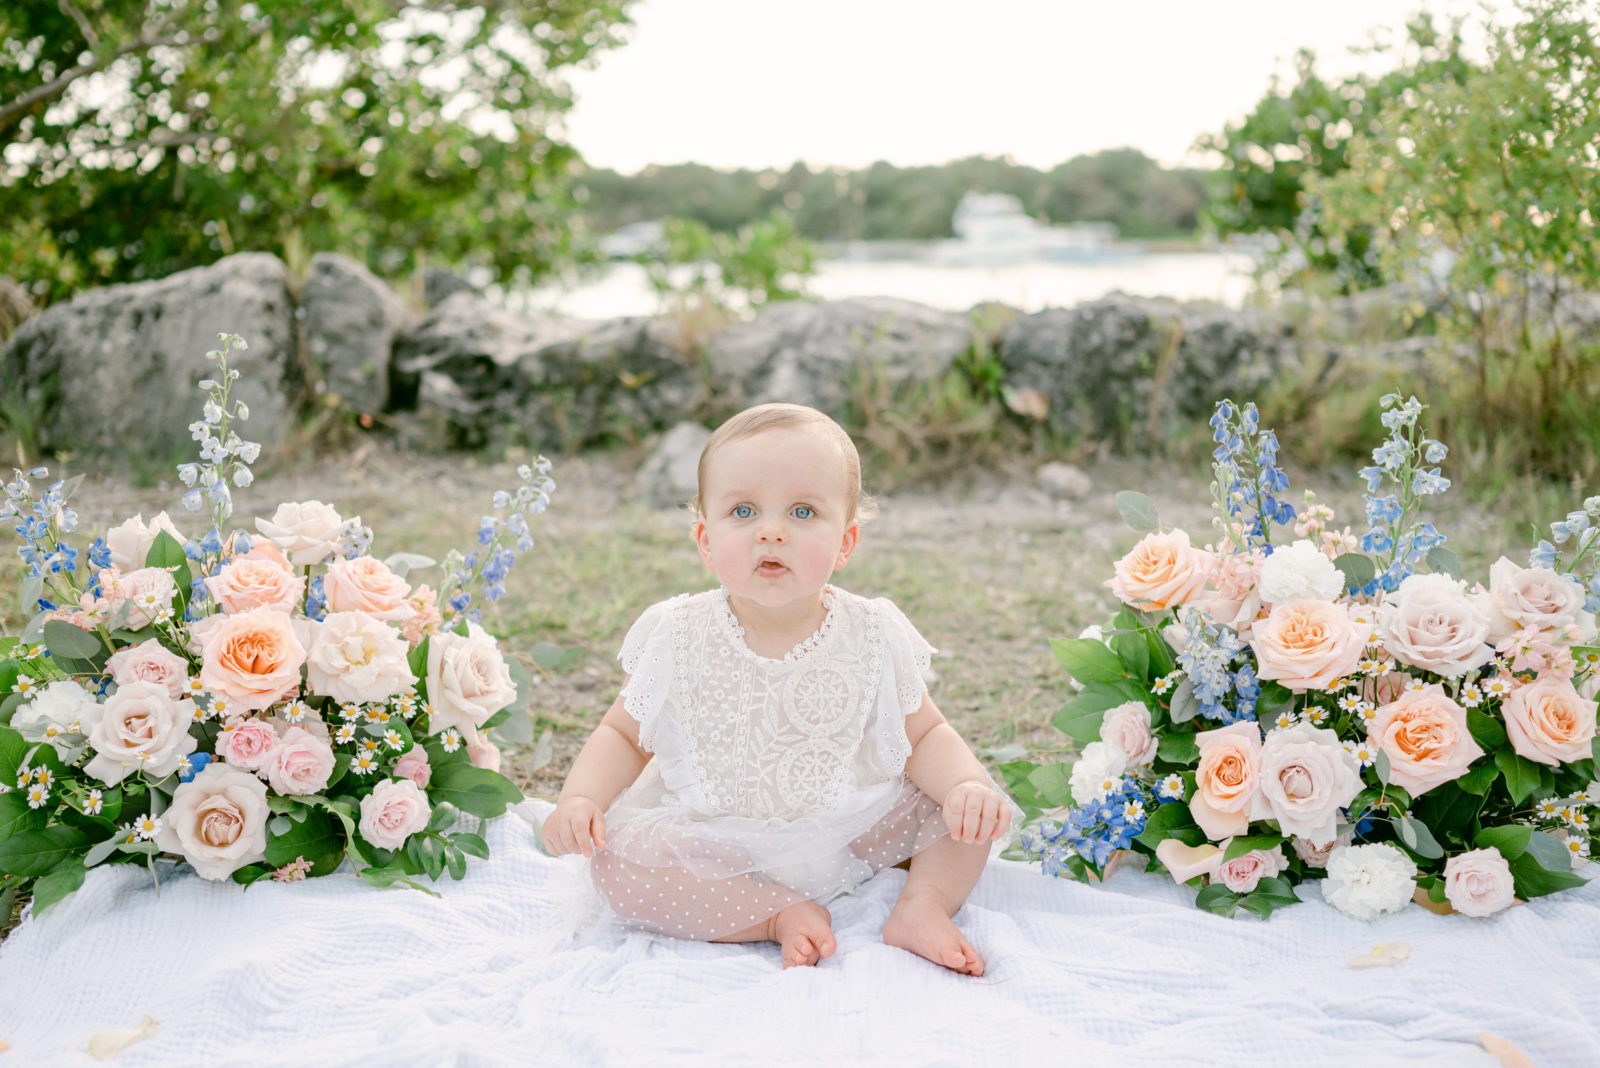 Baby and flowers